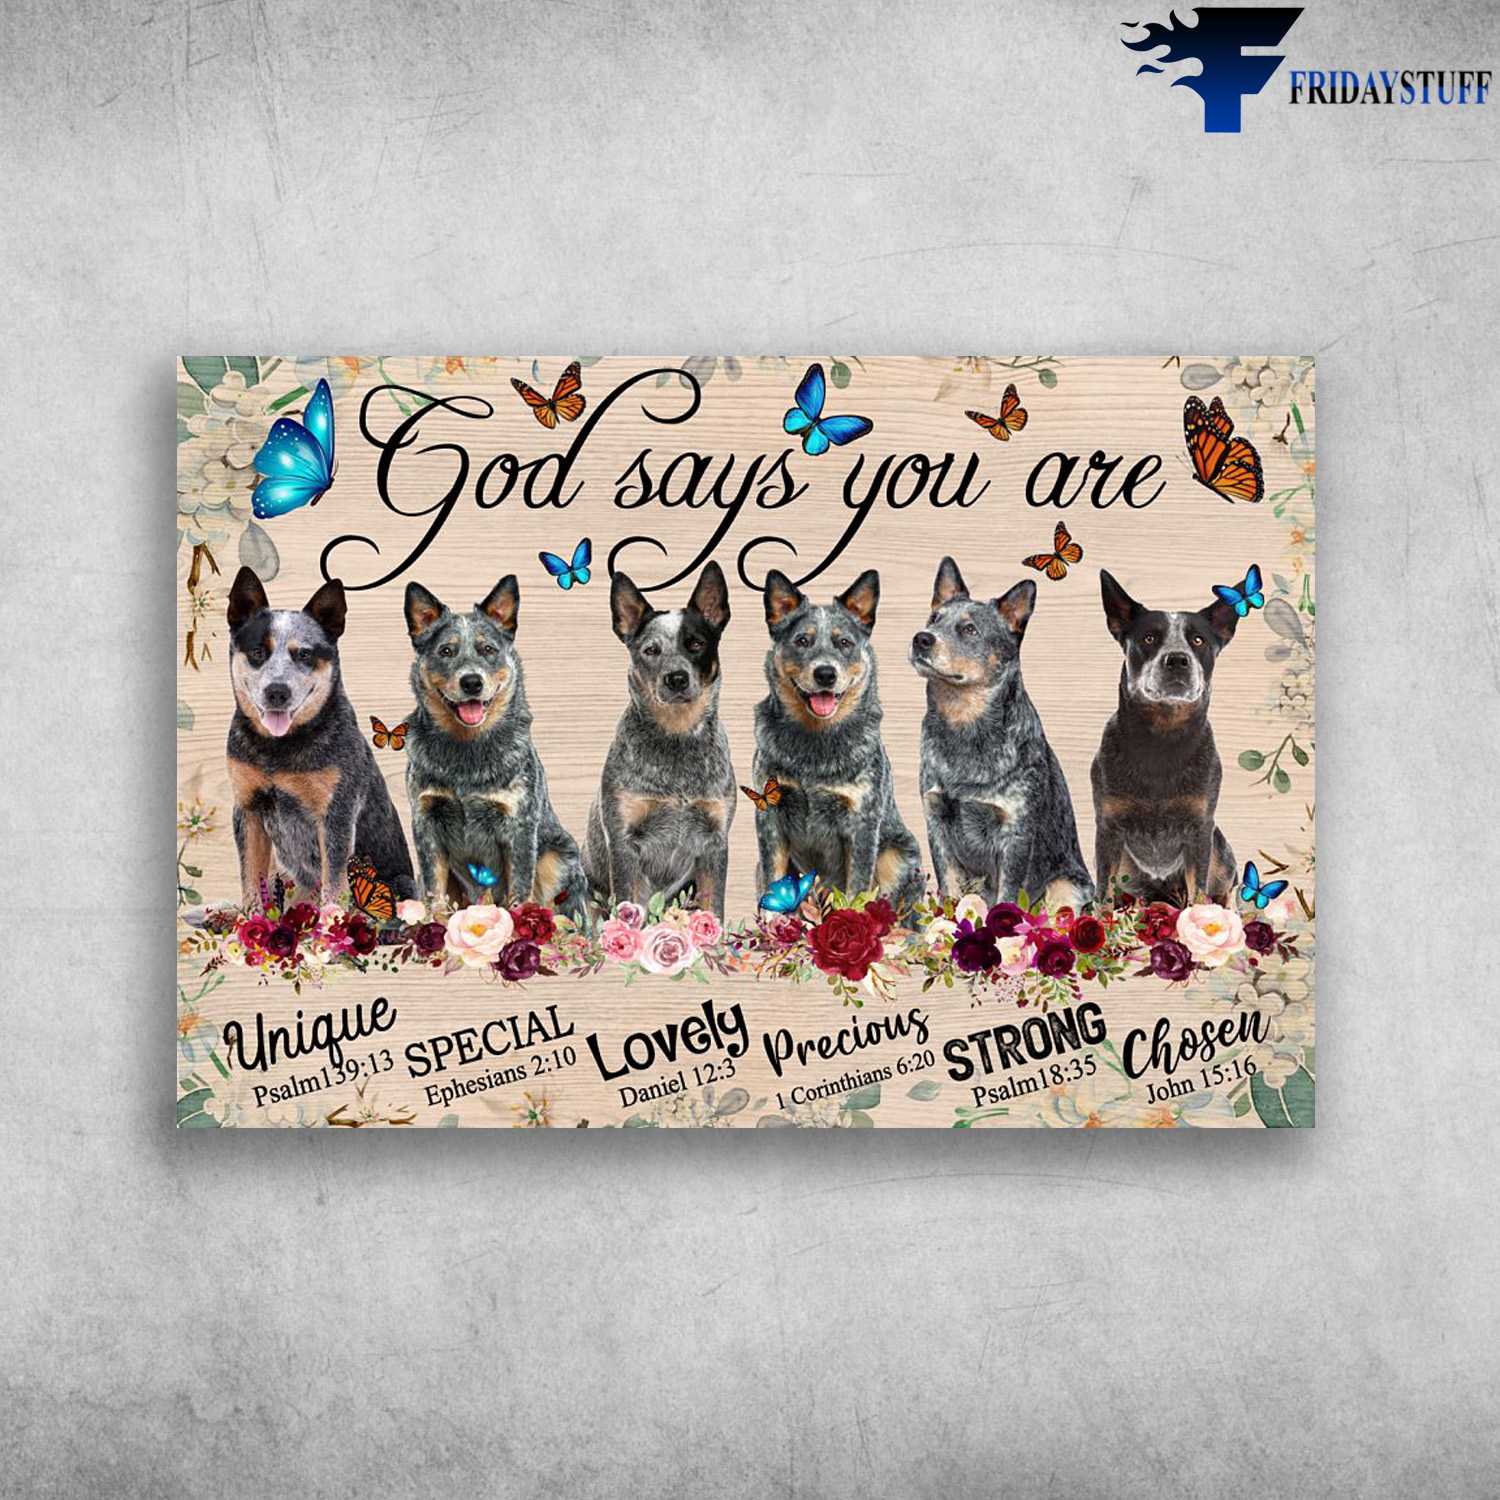 Heeler Dog, Heeler Butterfly - God Says You Are, Unique, Special, Lovely, Precious, Strong, Chosen